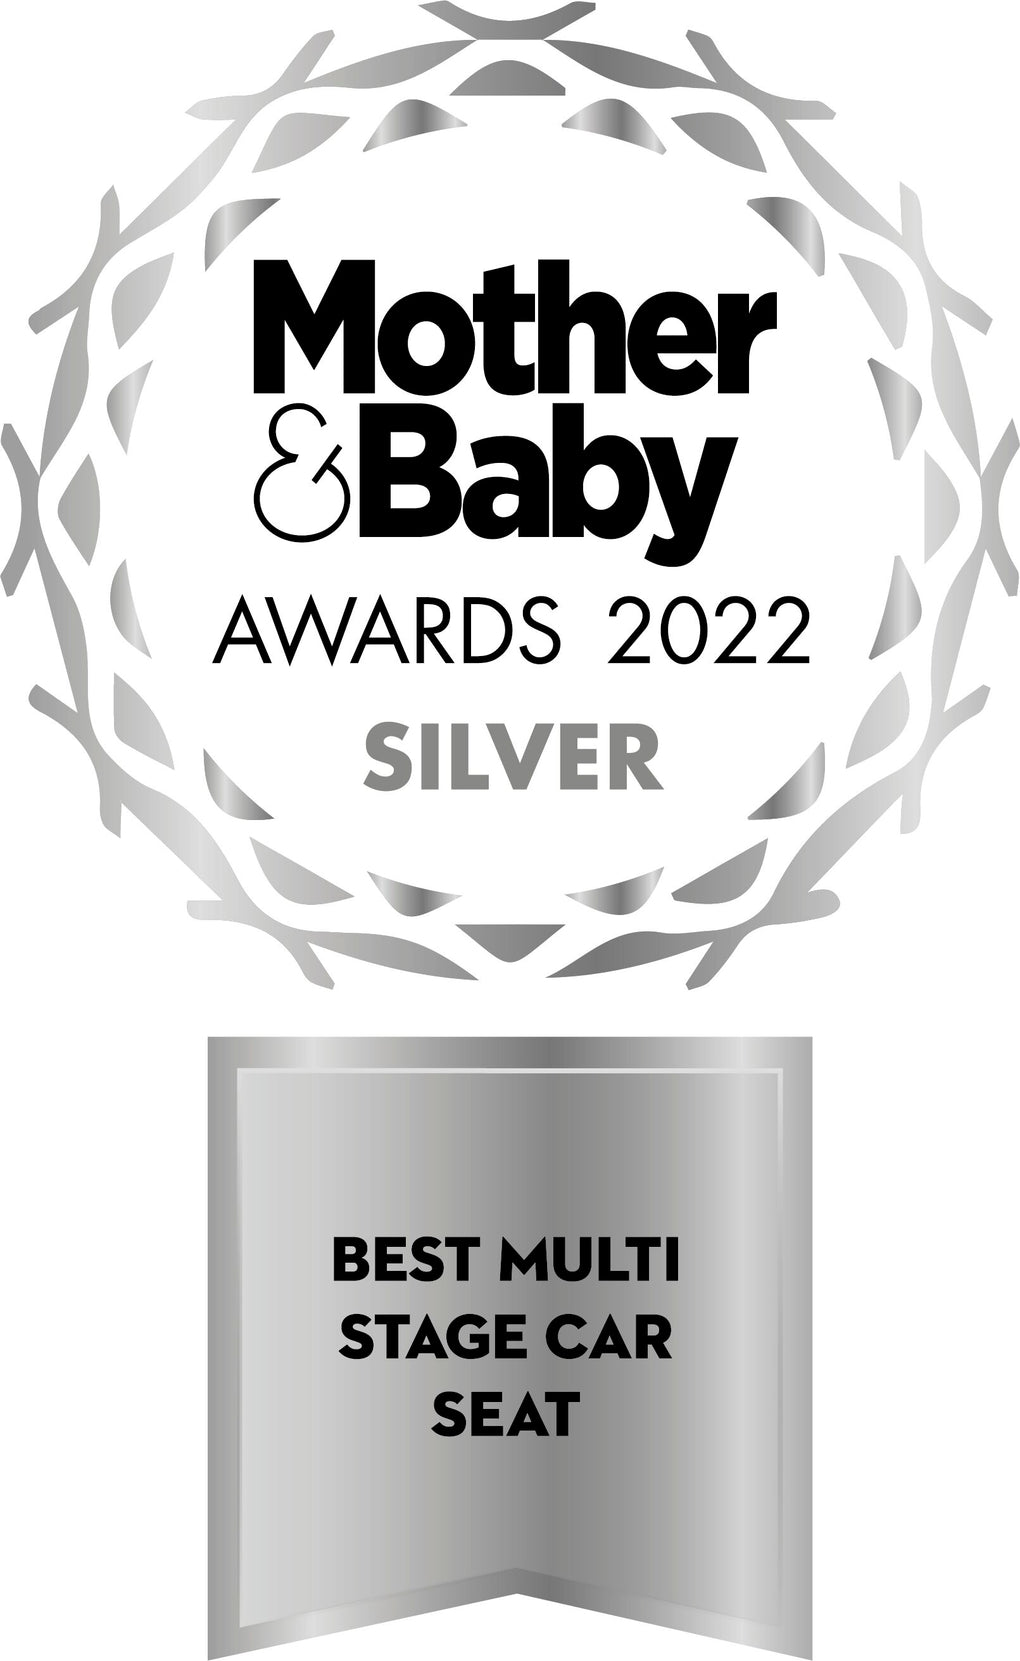 cyb_22_uk_pallasg_award_mother-baby_silver_bestmultistageseat_183d0d22a99a4170-Natural Baby Shower